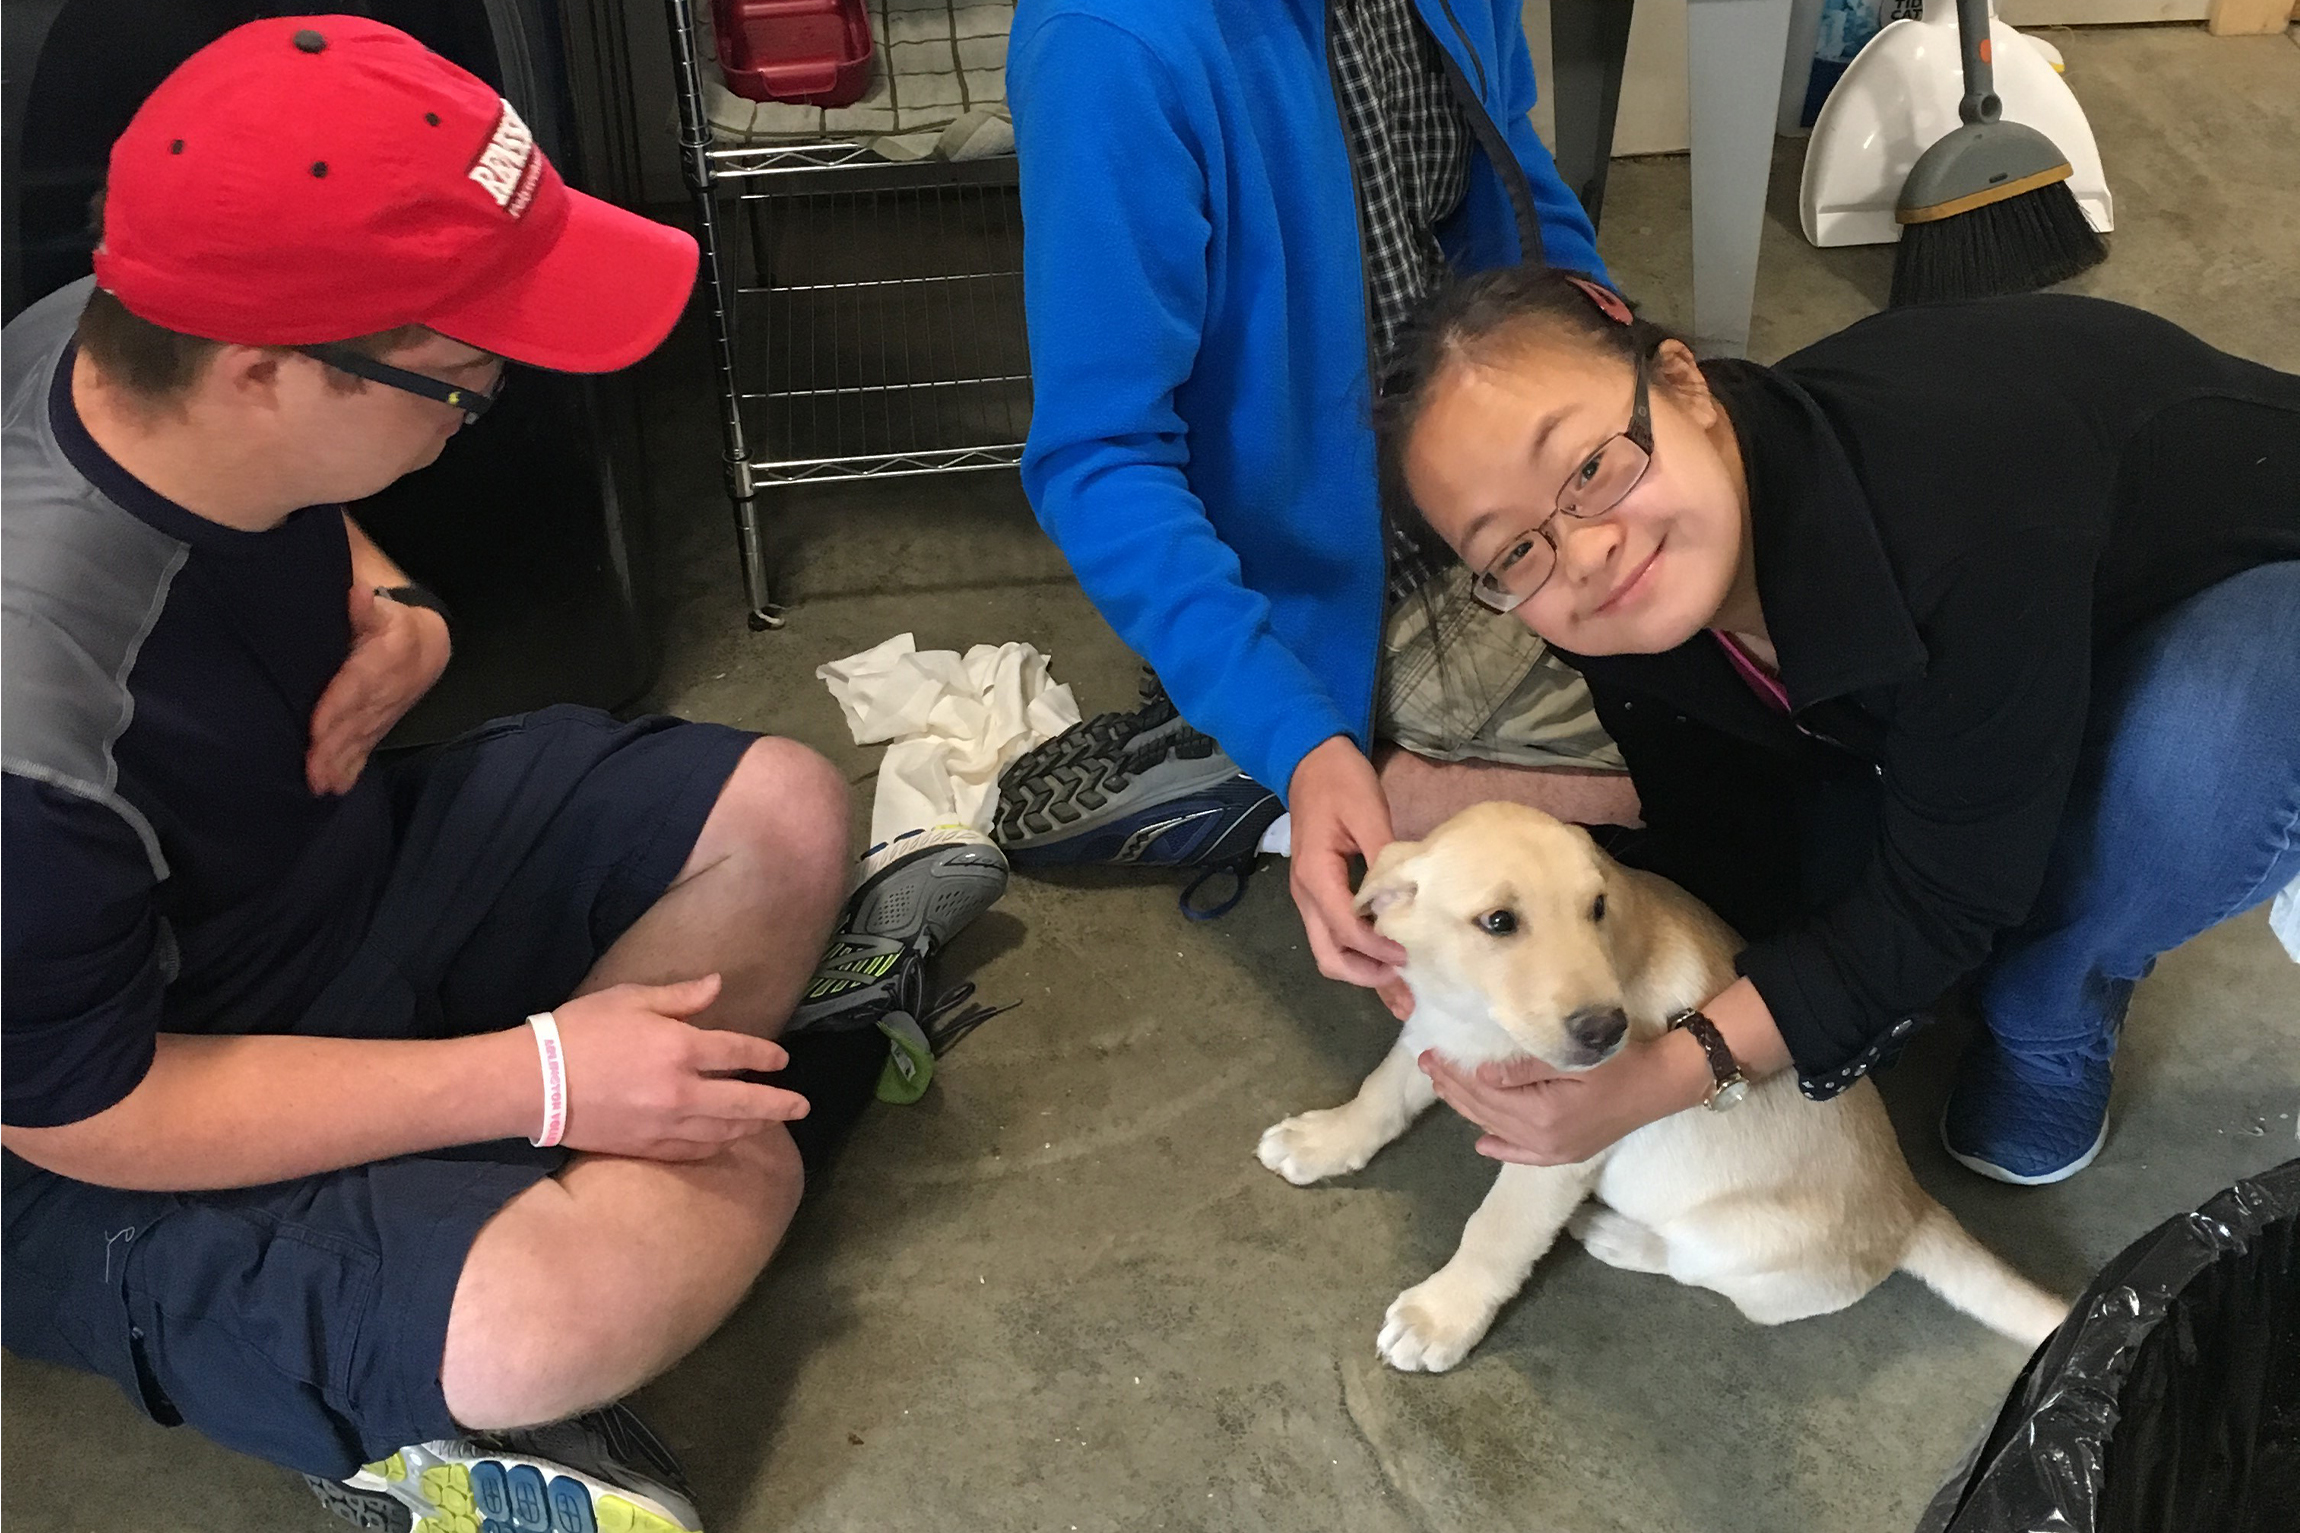 Playing with and caring for a puppy is part of the skill building day program.